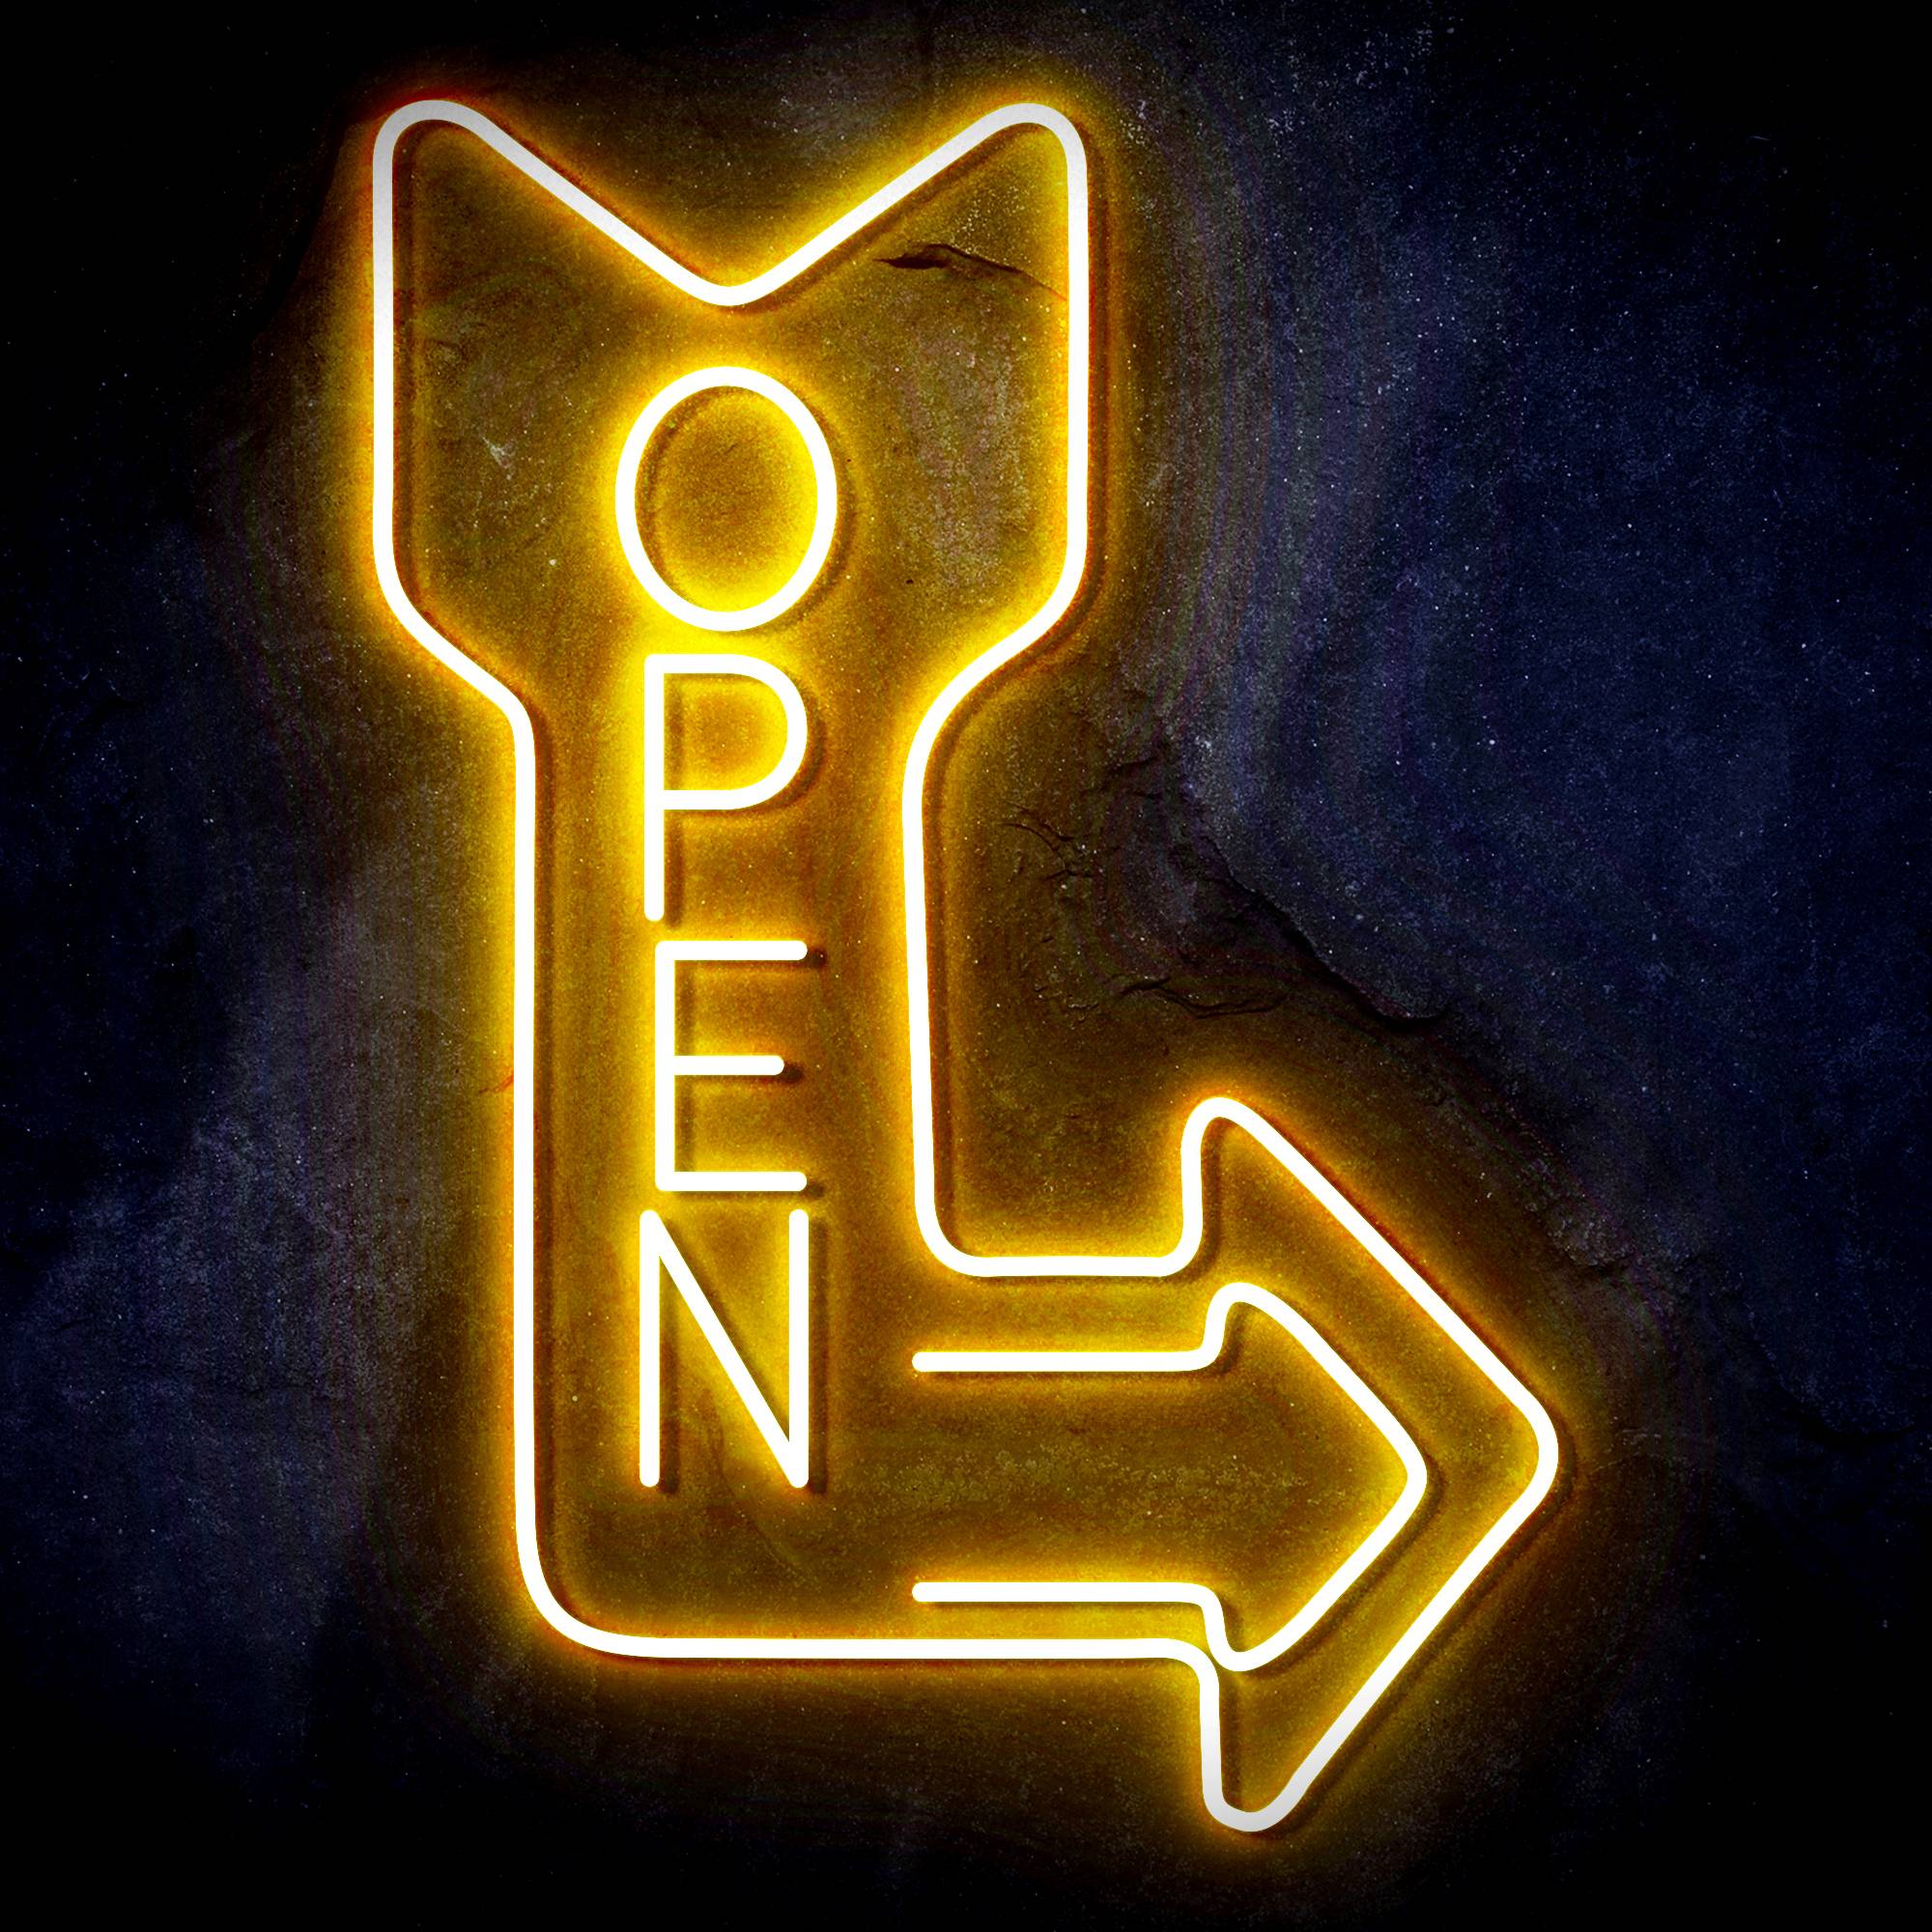 OPEN Signage Vertical with Arrow LED Neon Sign